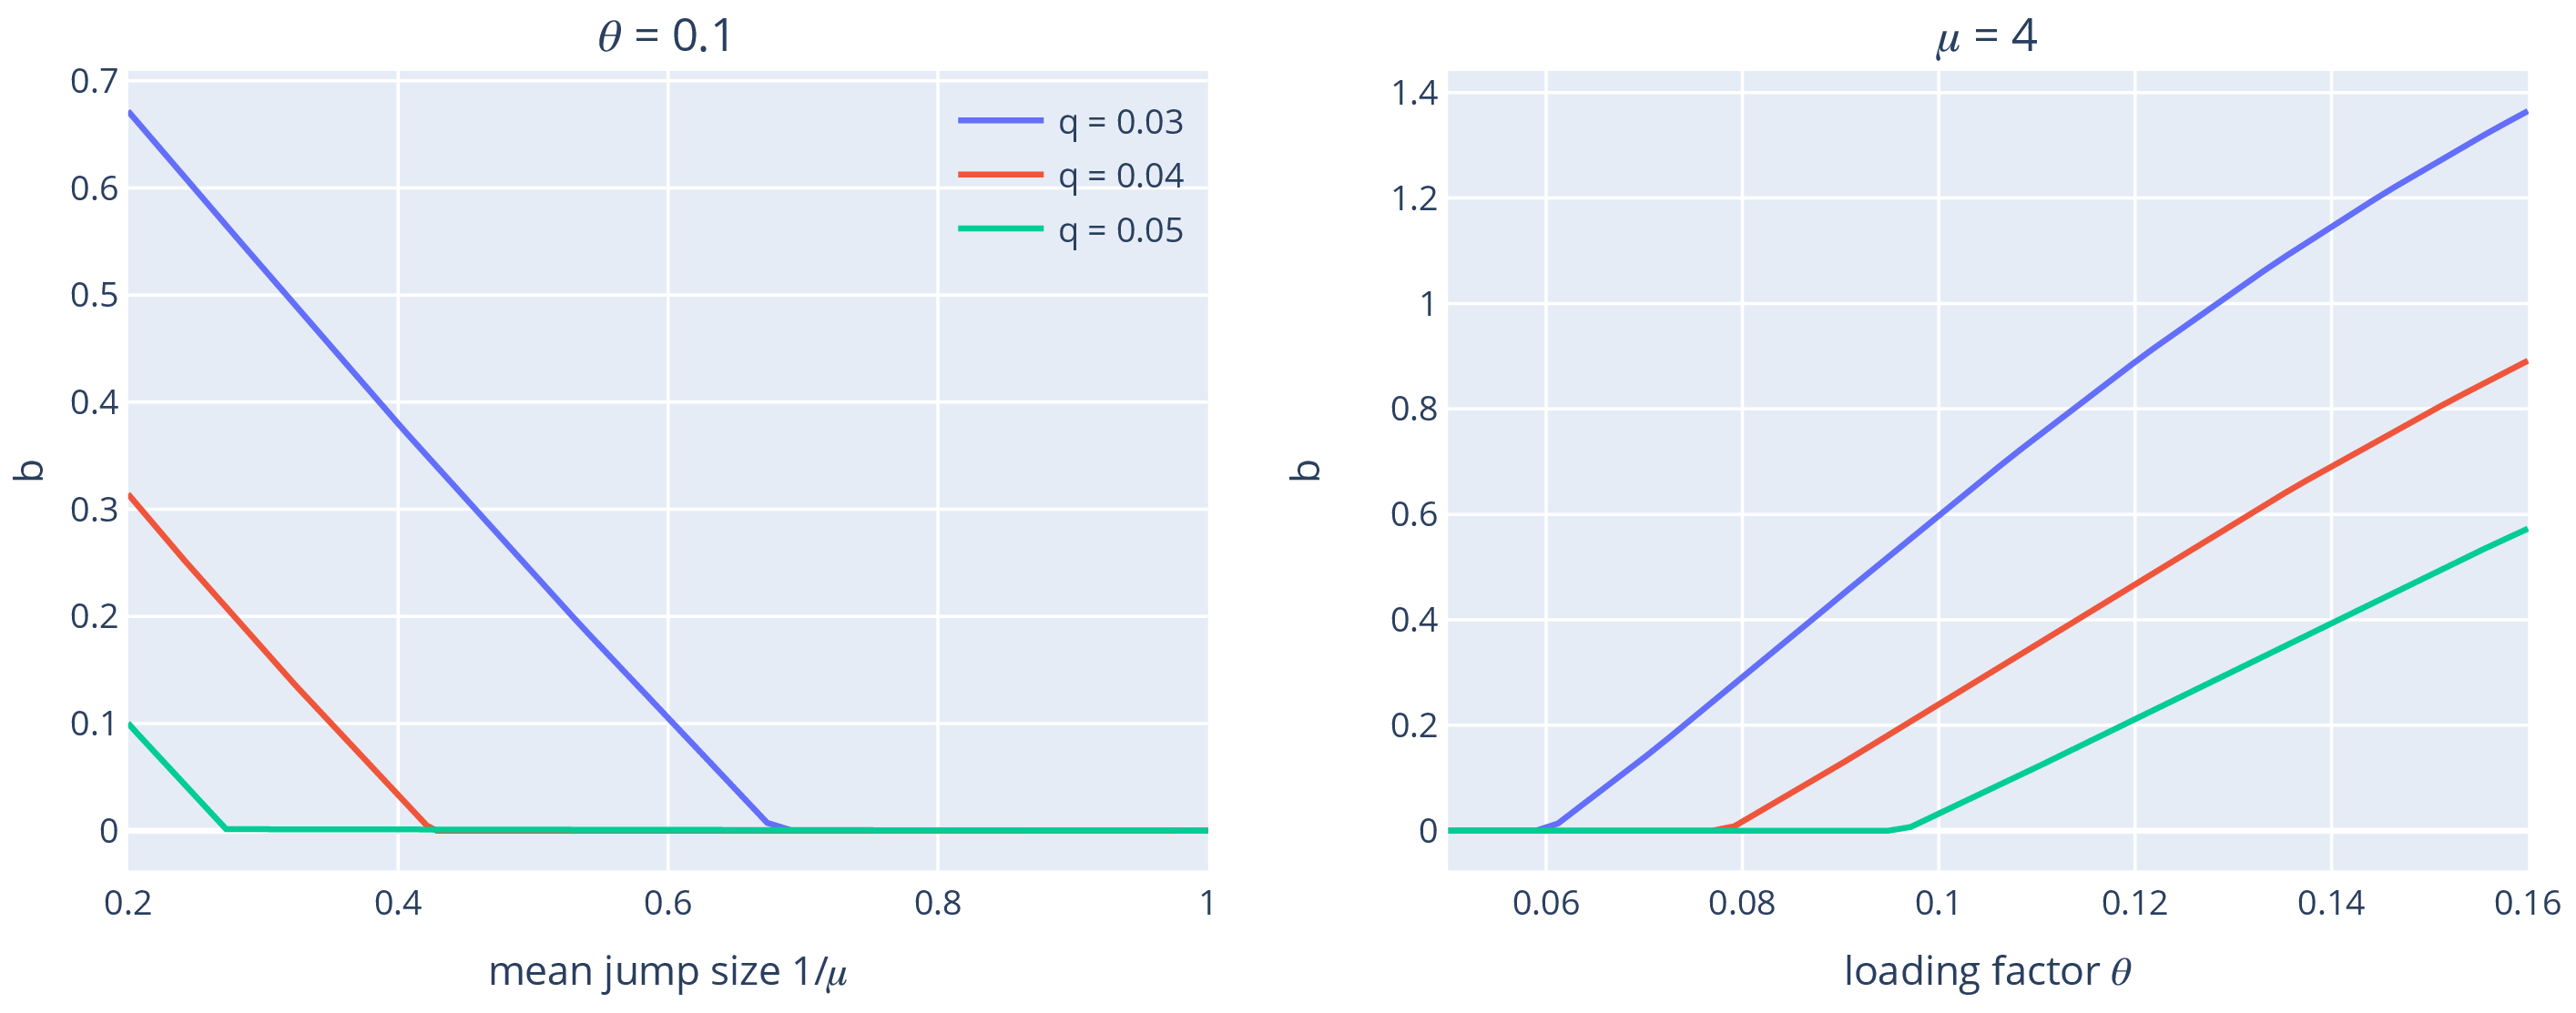 Two plots. Left: plot of b against mean jump size (1/mu) for theta = 0.1.
Three series: blue (q = 0.03), red (q = 0.04) and green (q = 0.05). Each shows
a roughly linear decrease until reaching zero, upon which it remains at zero.
The blue series lies above the red series which lies above the green series.
Right: plot of b again loading factor theta for mu = 4. Three series, as before,
with the same ordering. Each series starts at zero, and at some point leaves
and increases in a way which is close to linear but slightly concave.